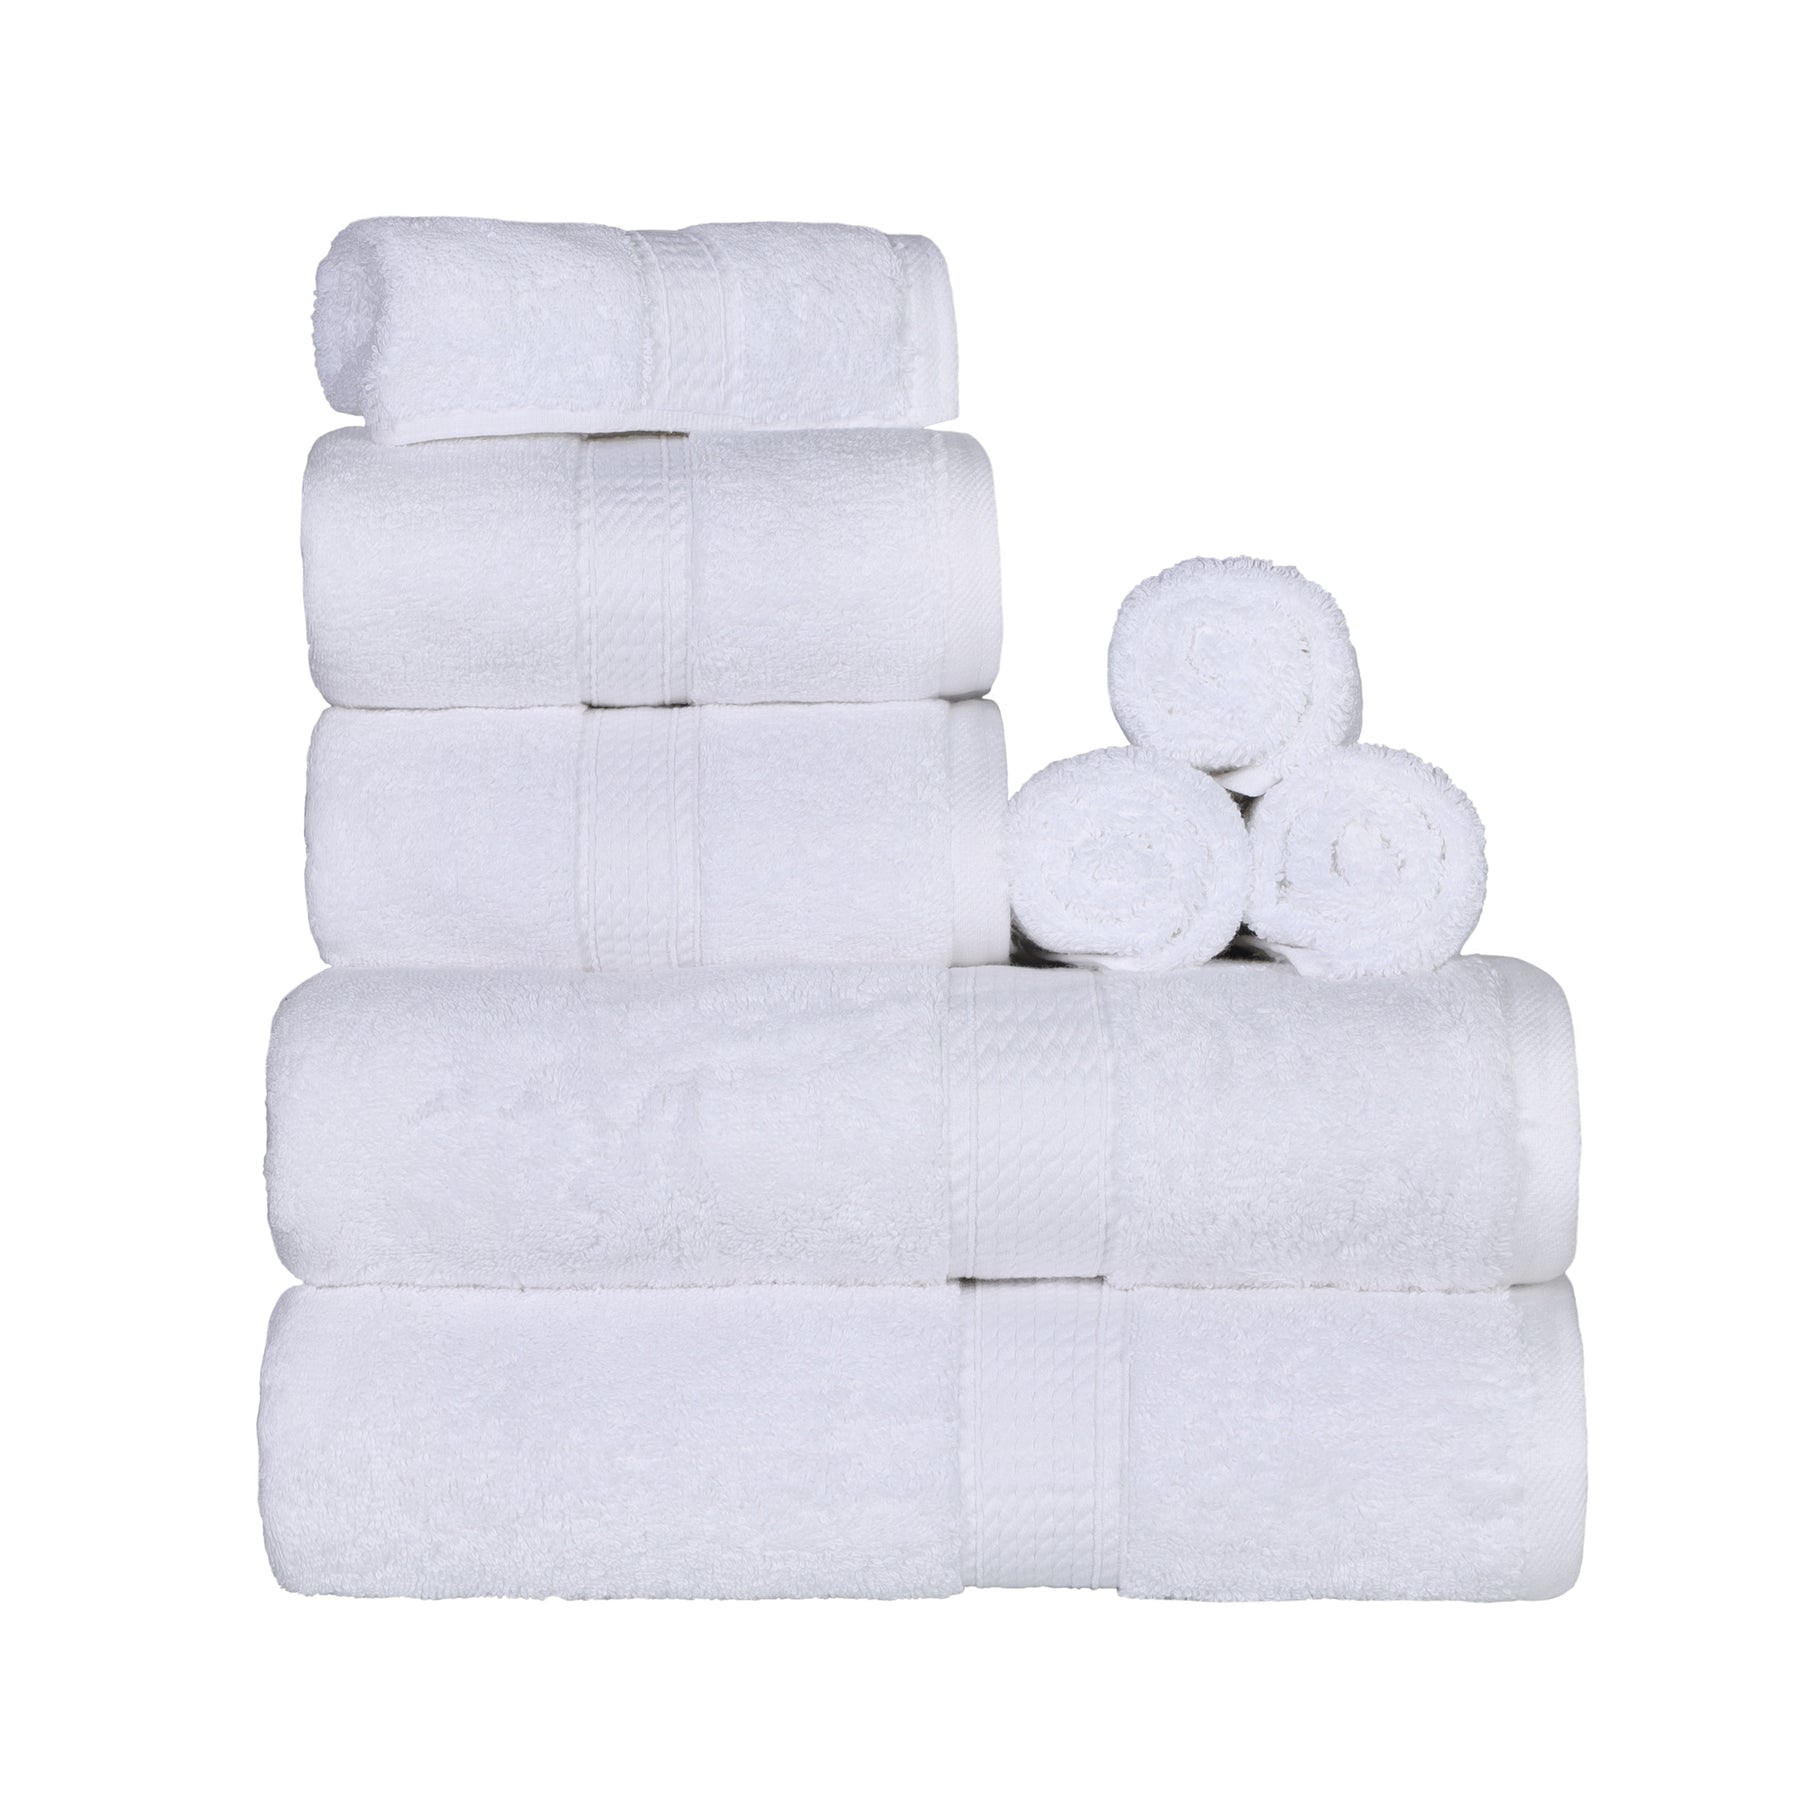 900 GSM Egyptian Cotton Towel Set Of 8, Plush & Absorbent Face, Hand & Bath  Towels - LoftyStyles